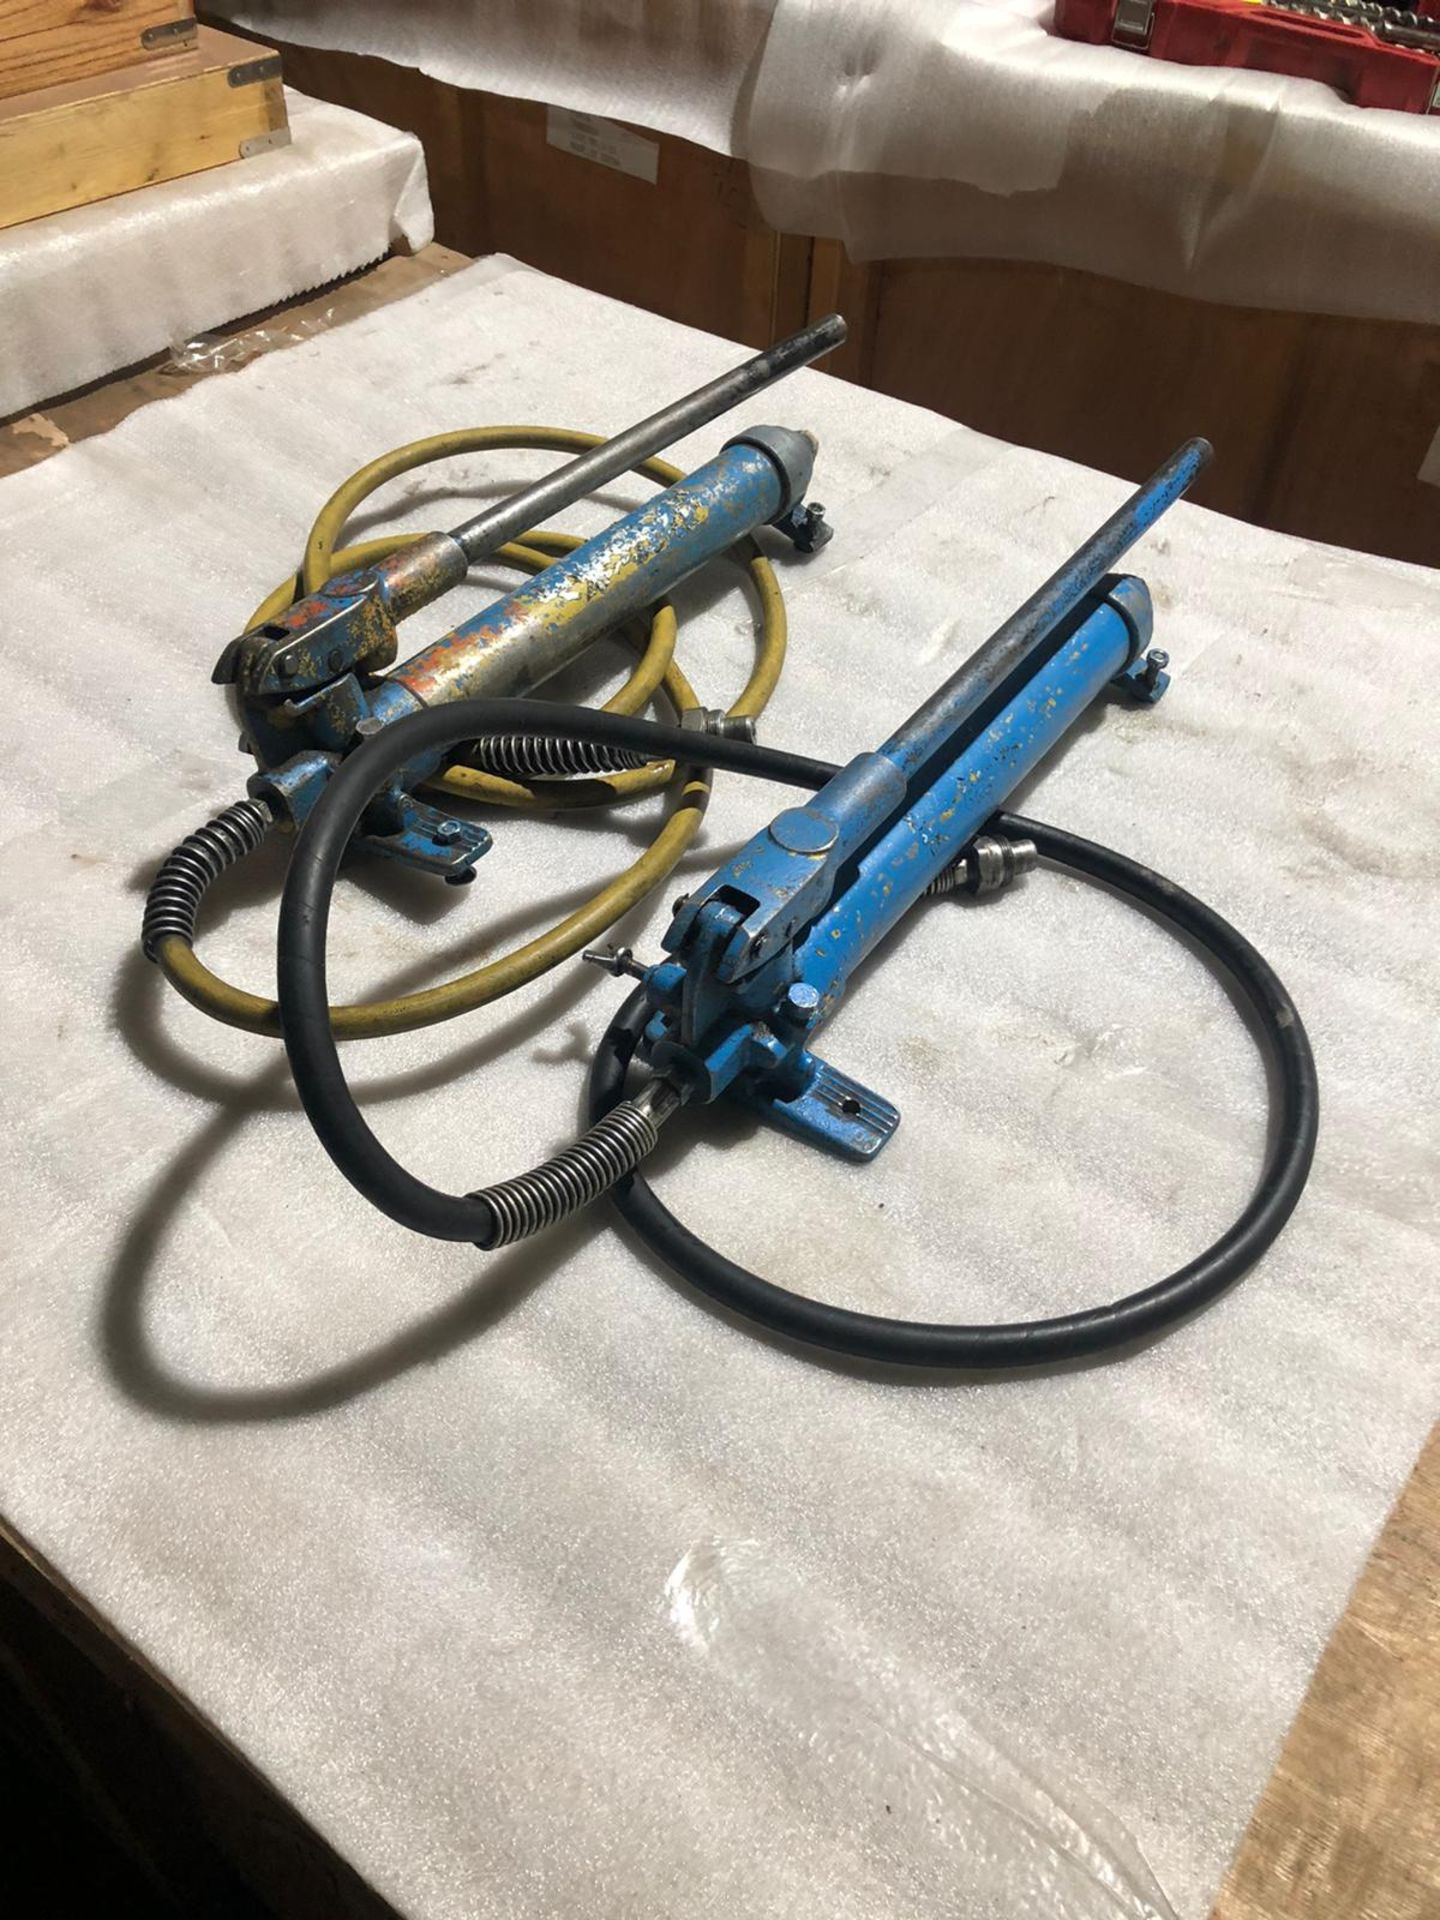 Lot of 2 (2 units) Enerpac Hand Pumps *** FROM 5-STAR RIGGING